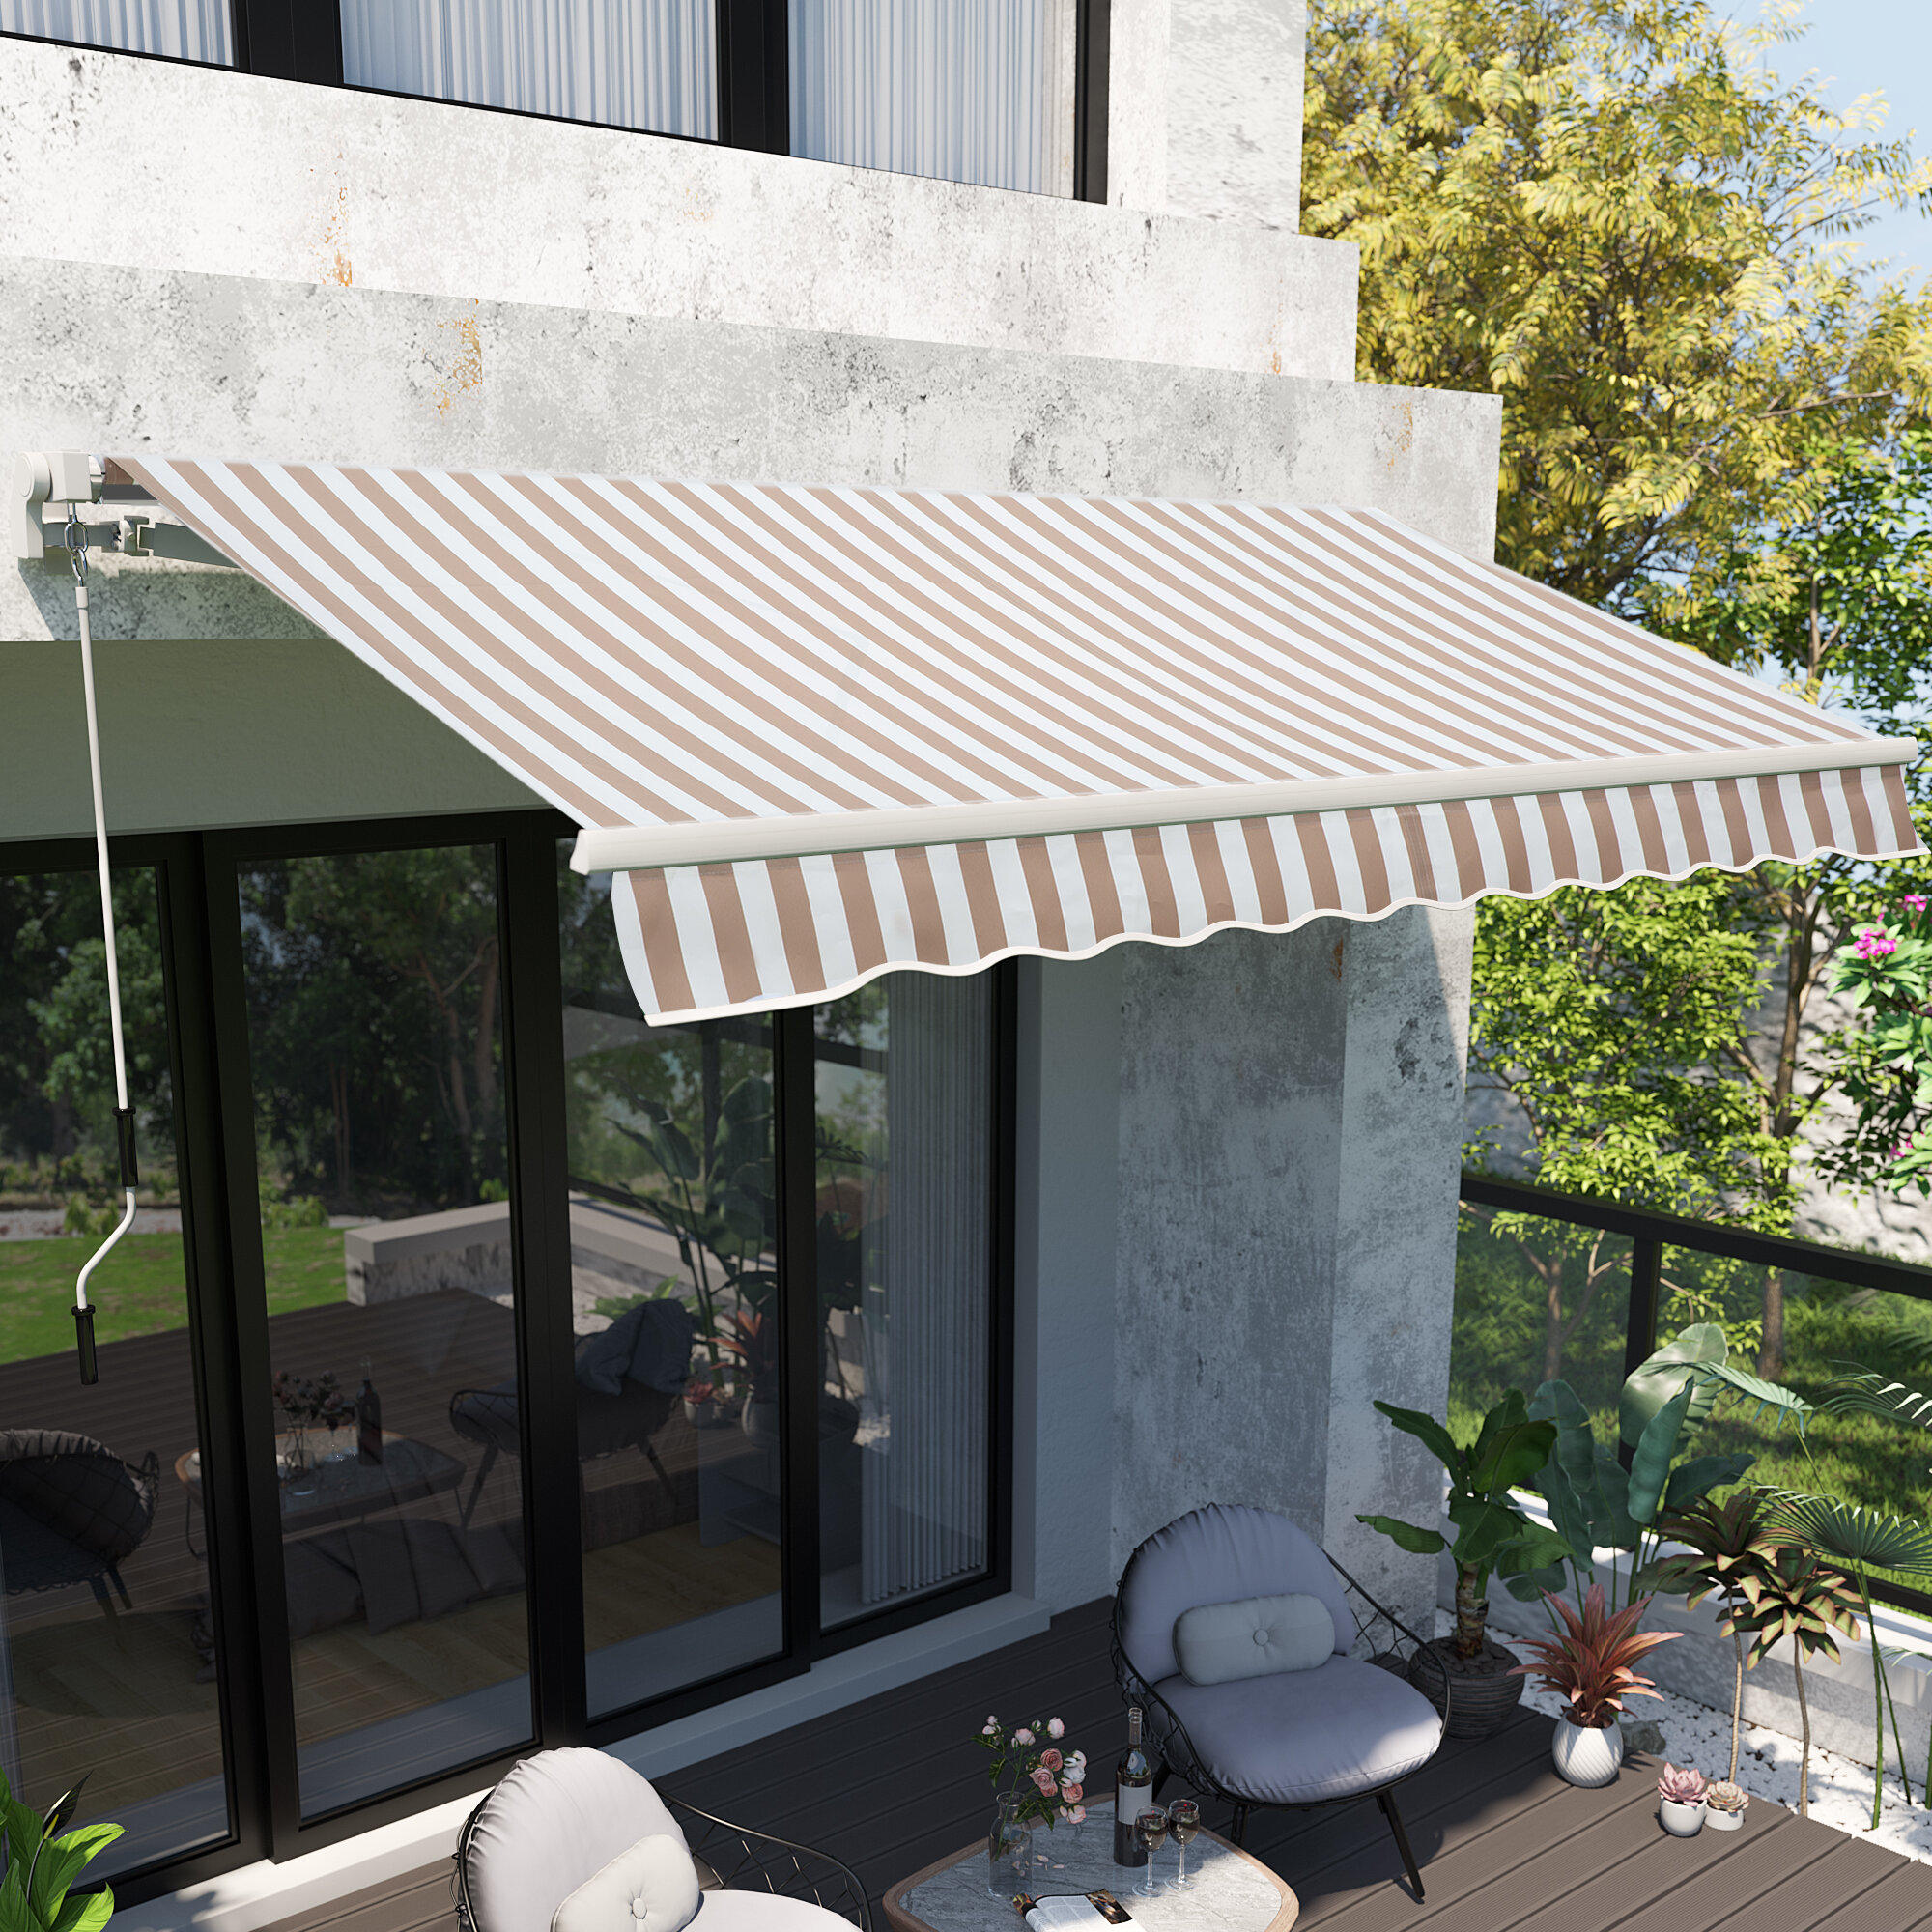 Details about   Extendible Outdoor Patio Awning Canopy Window DoorRetractable Sun Shade Shelter 